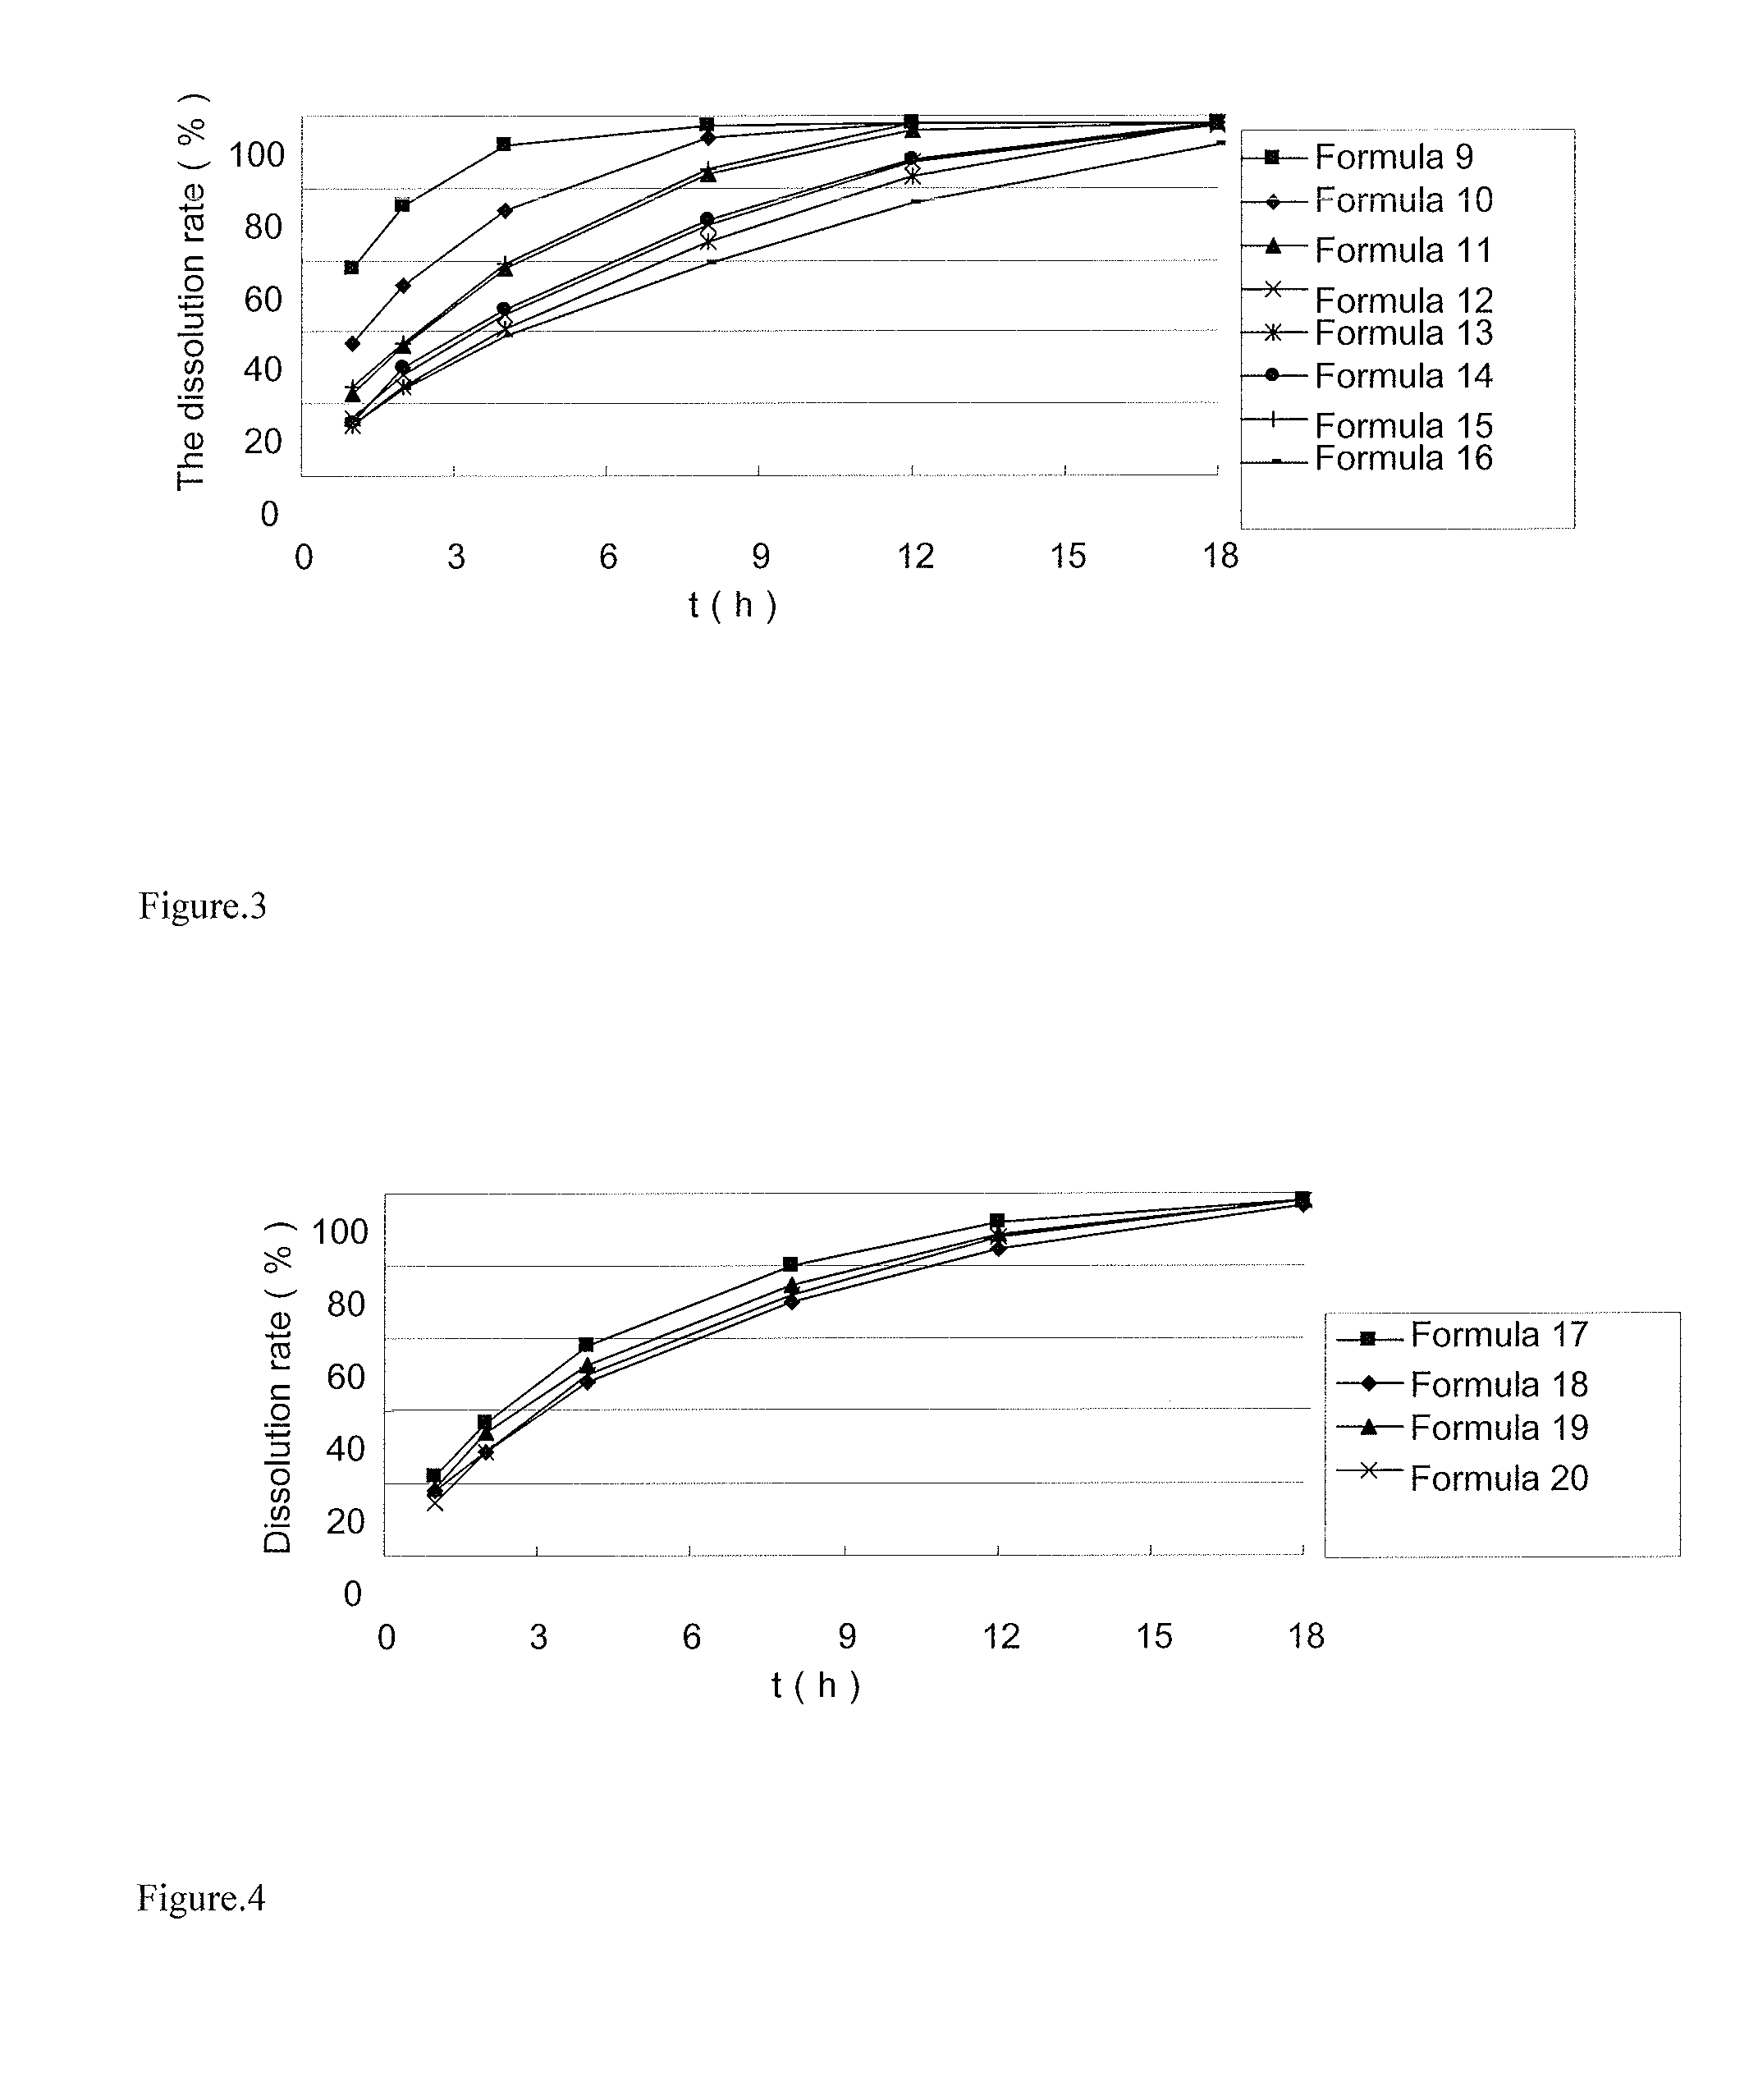 Sustained-release preparation of ivabradine or pharmaceutically acceptable salts thereof